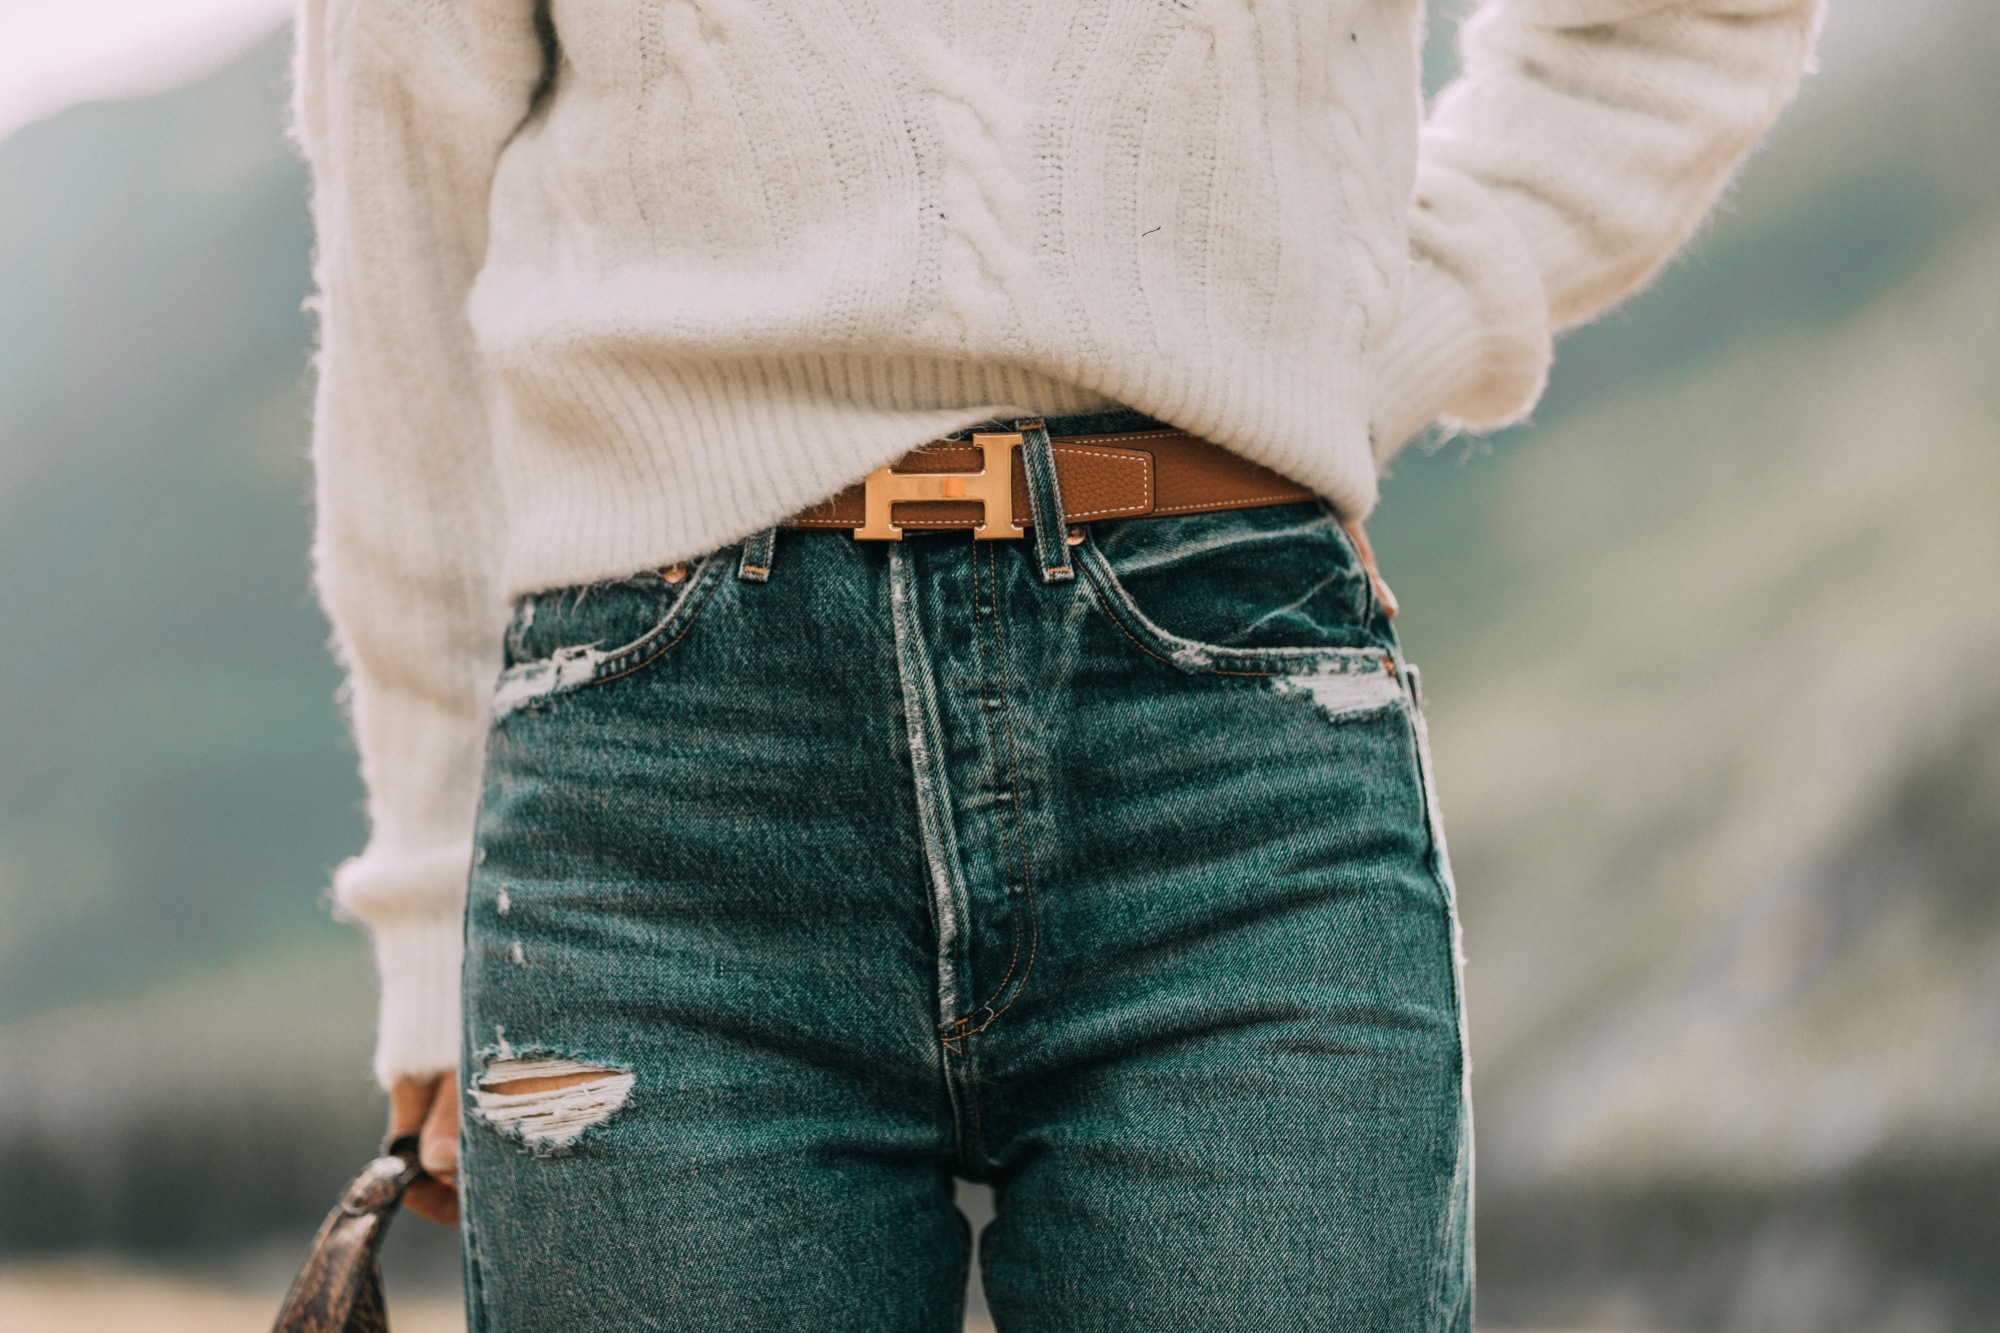 Women's fashion blogger, Erin Busbee, shares 5 fashion tips for women over 40 and recommends a leather belt hole punch to adjust belt sizing.